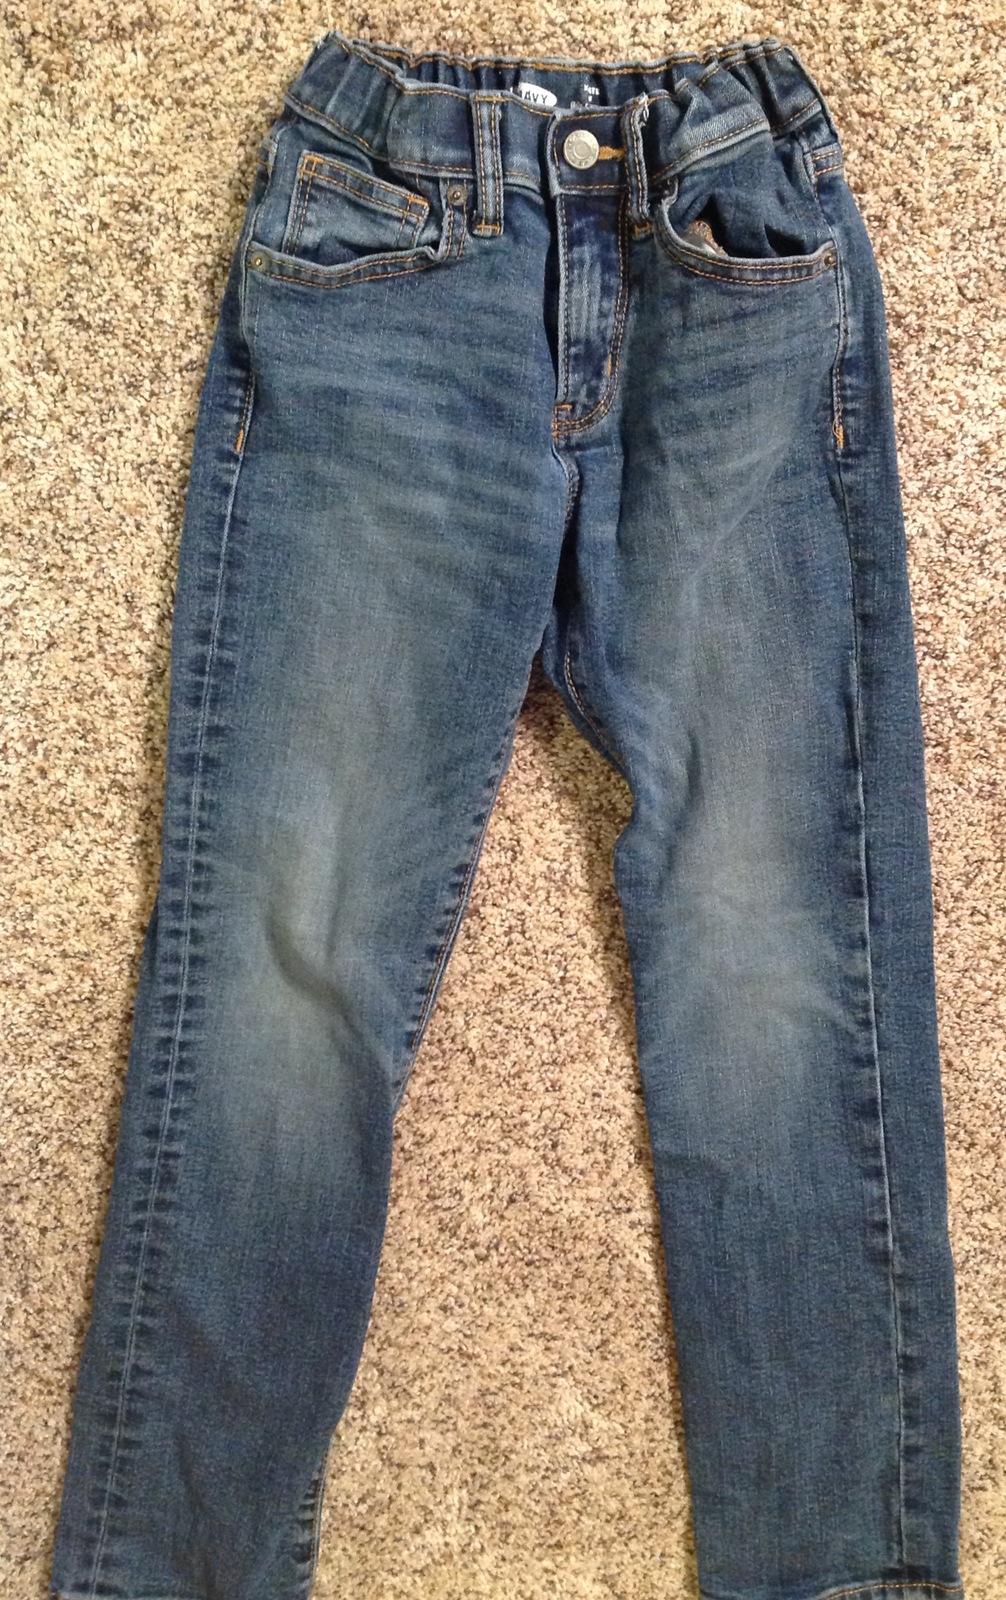 Primary image for Old Navy Boys Blue Jeans Size 8 Karate Slim Straight